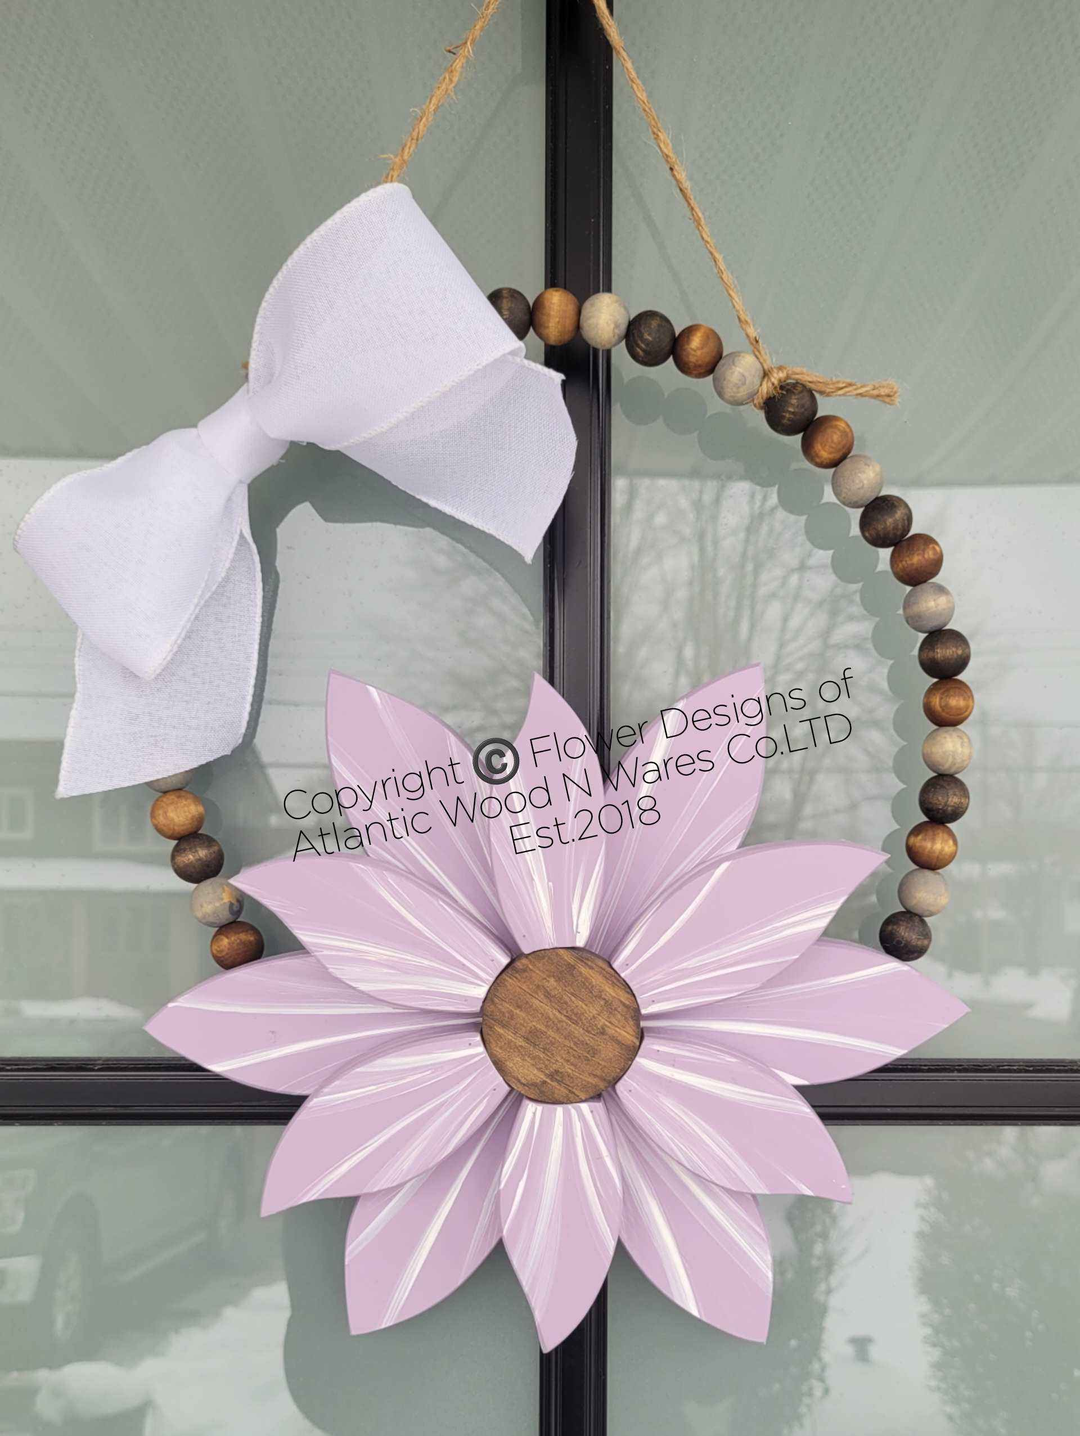  Atlantic Wood N Wares  Home & Garden>Home Décor>Wall Decor>Wall Hangings lavender/white Boho Style Wooden Bead Wreath with Painted Wood Flower | Hand-Stained Beads HOOPW006